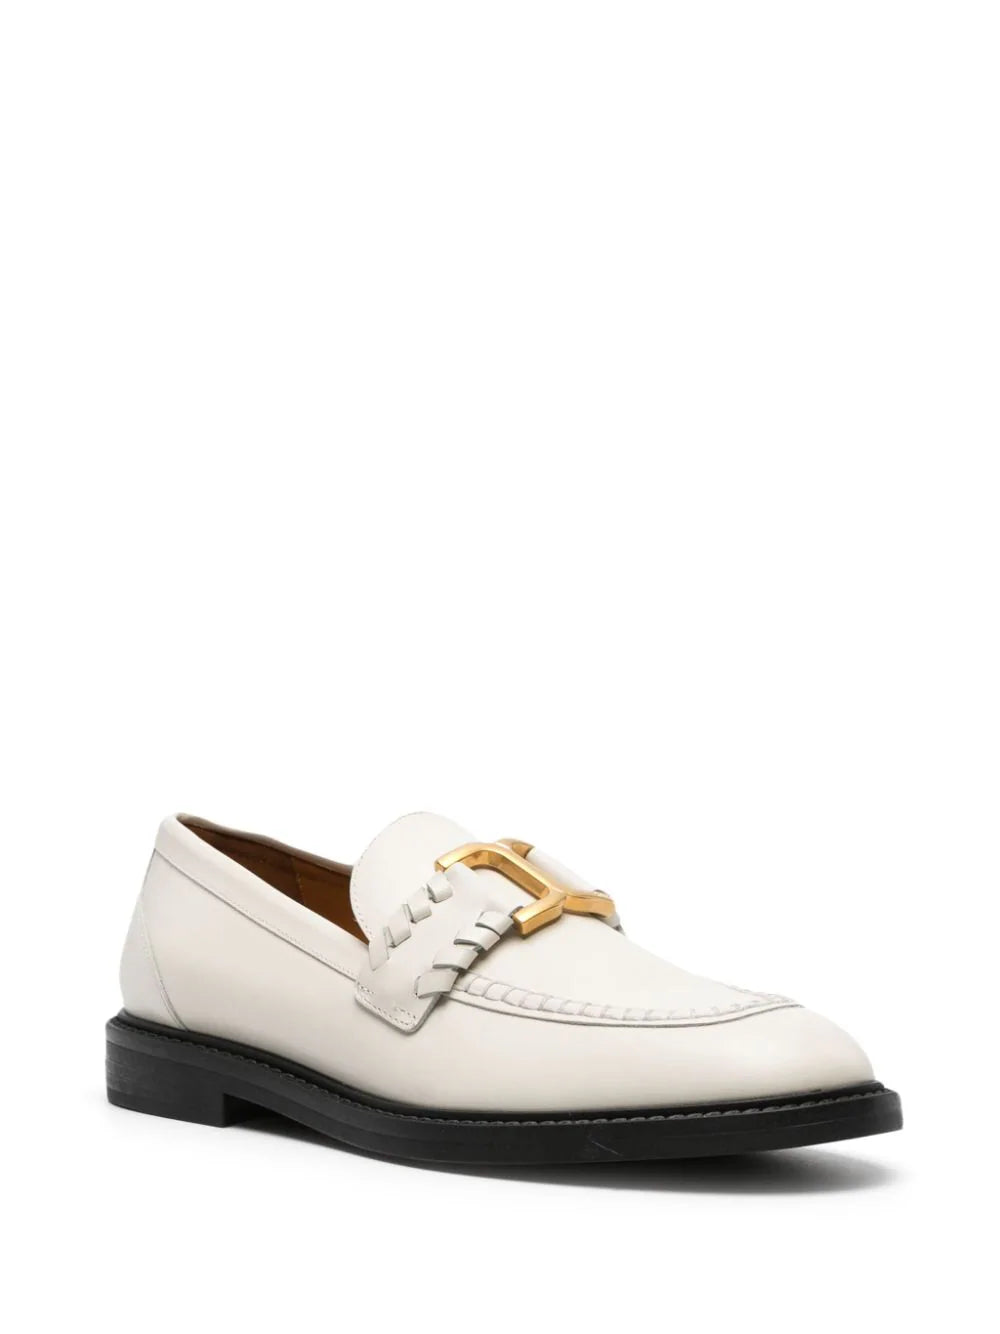 Marcie Loafer in Eggshell